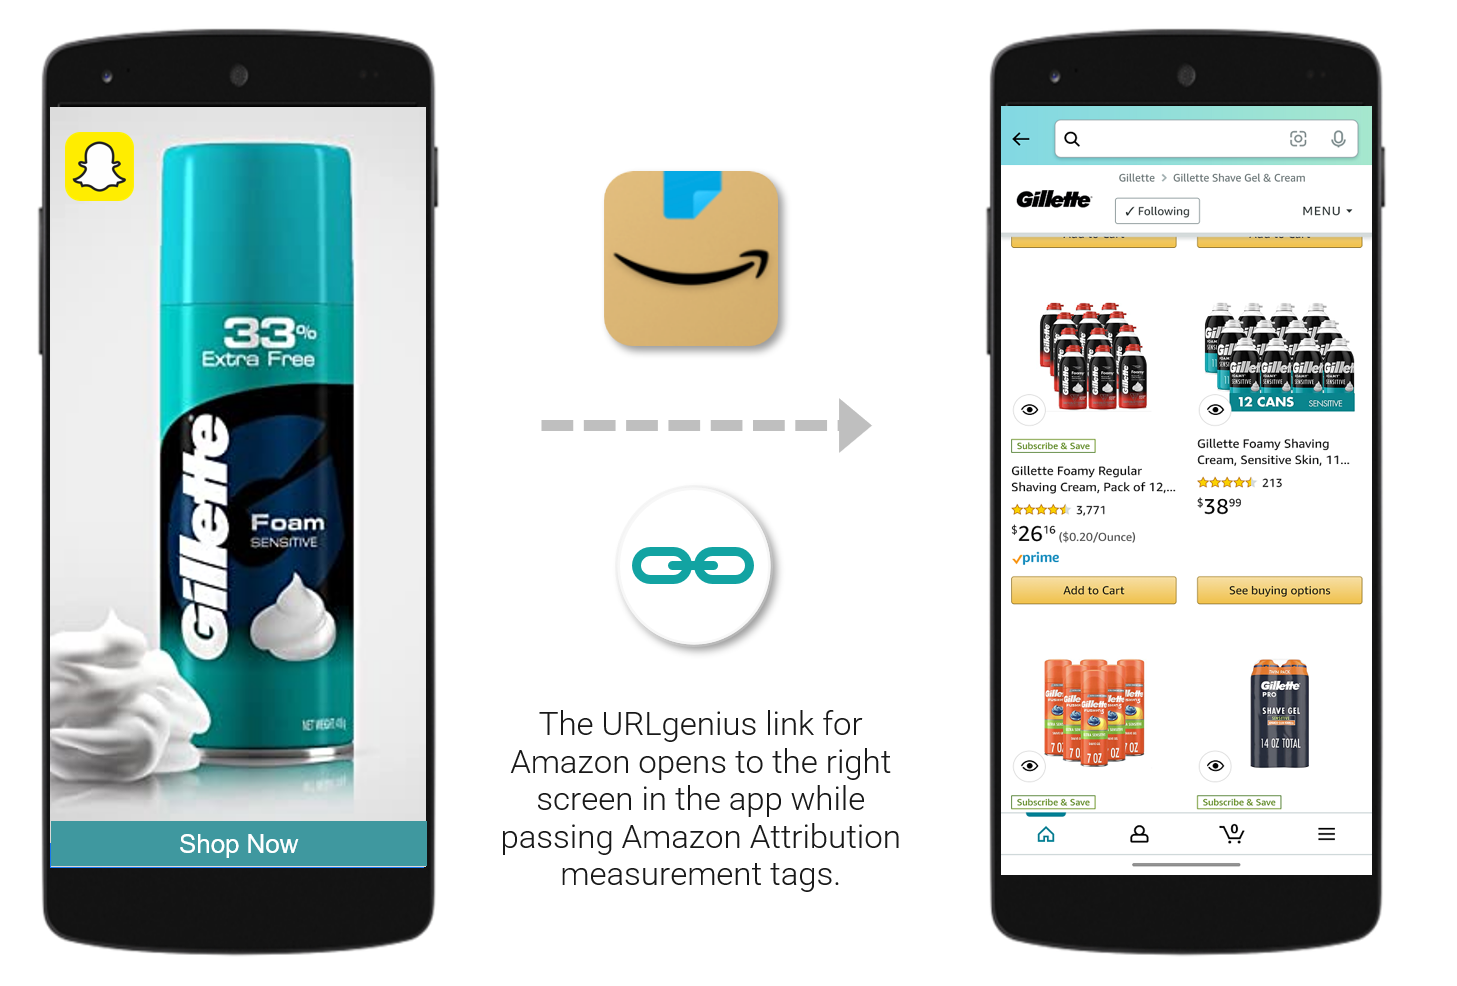 How to Create a an Amazon link that will Open the Amazon App from Snapchat